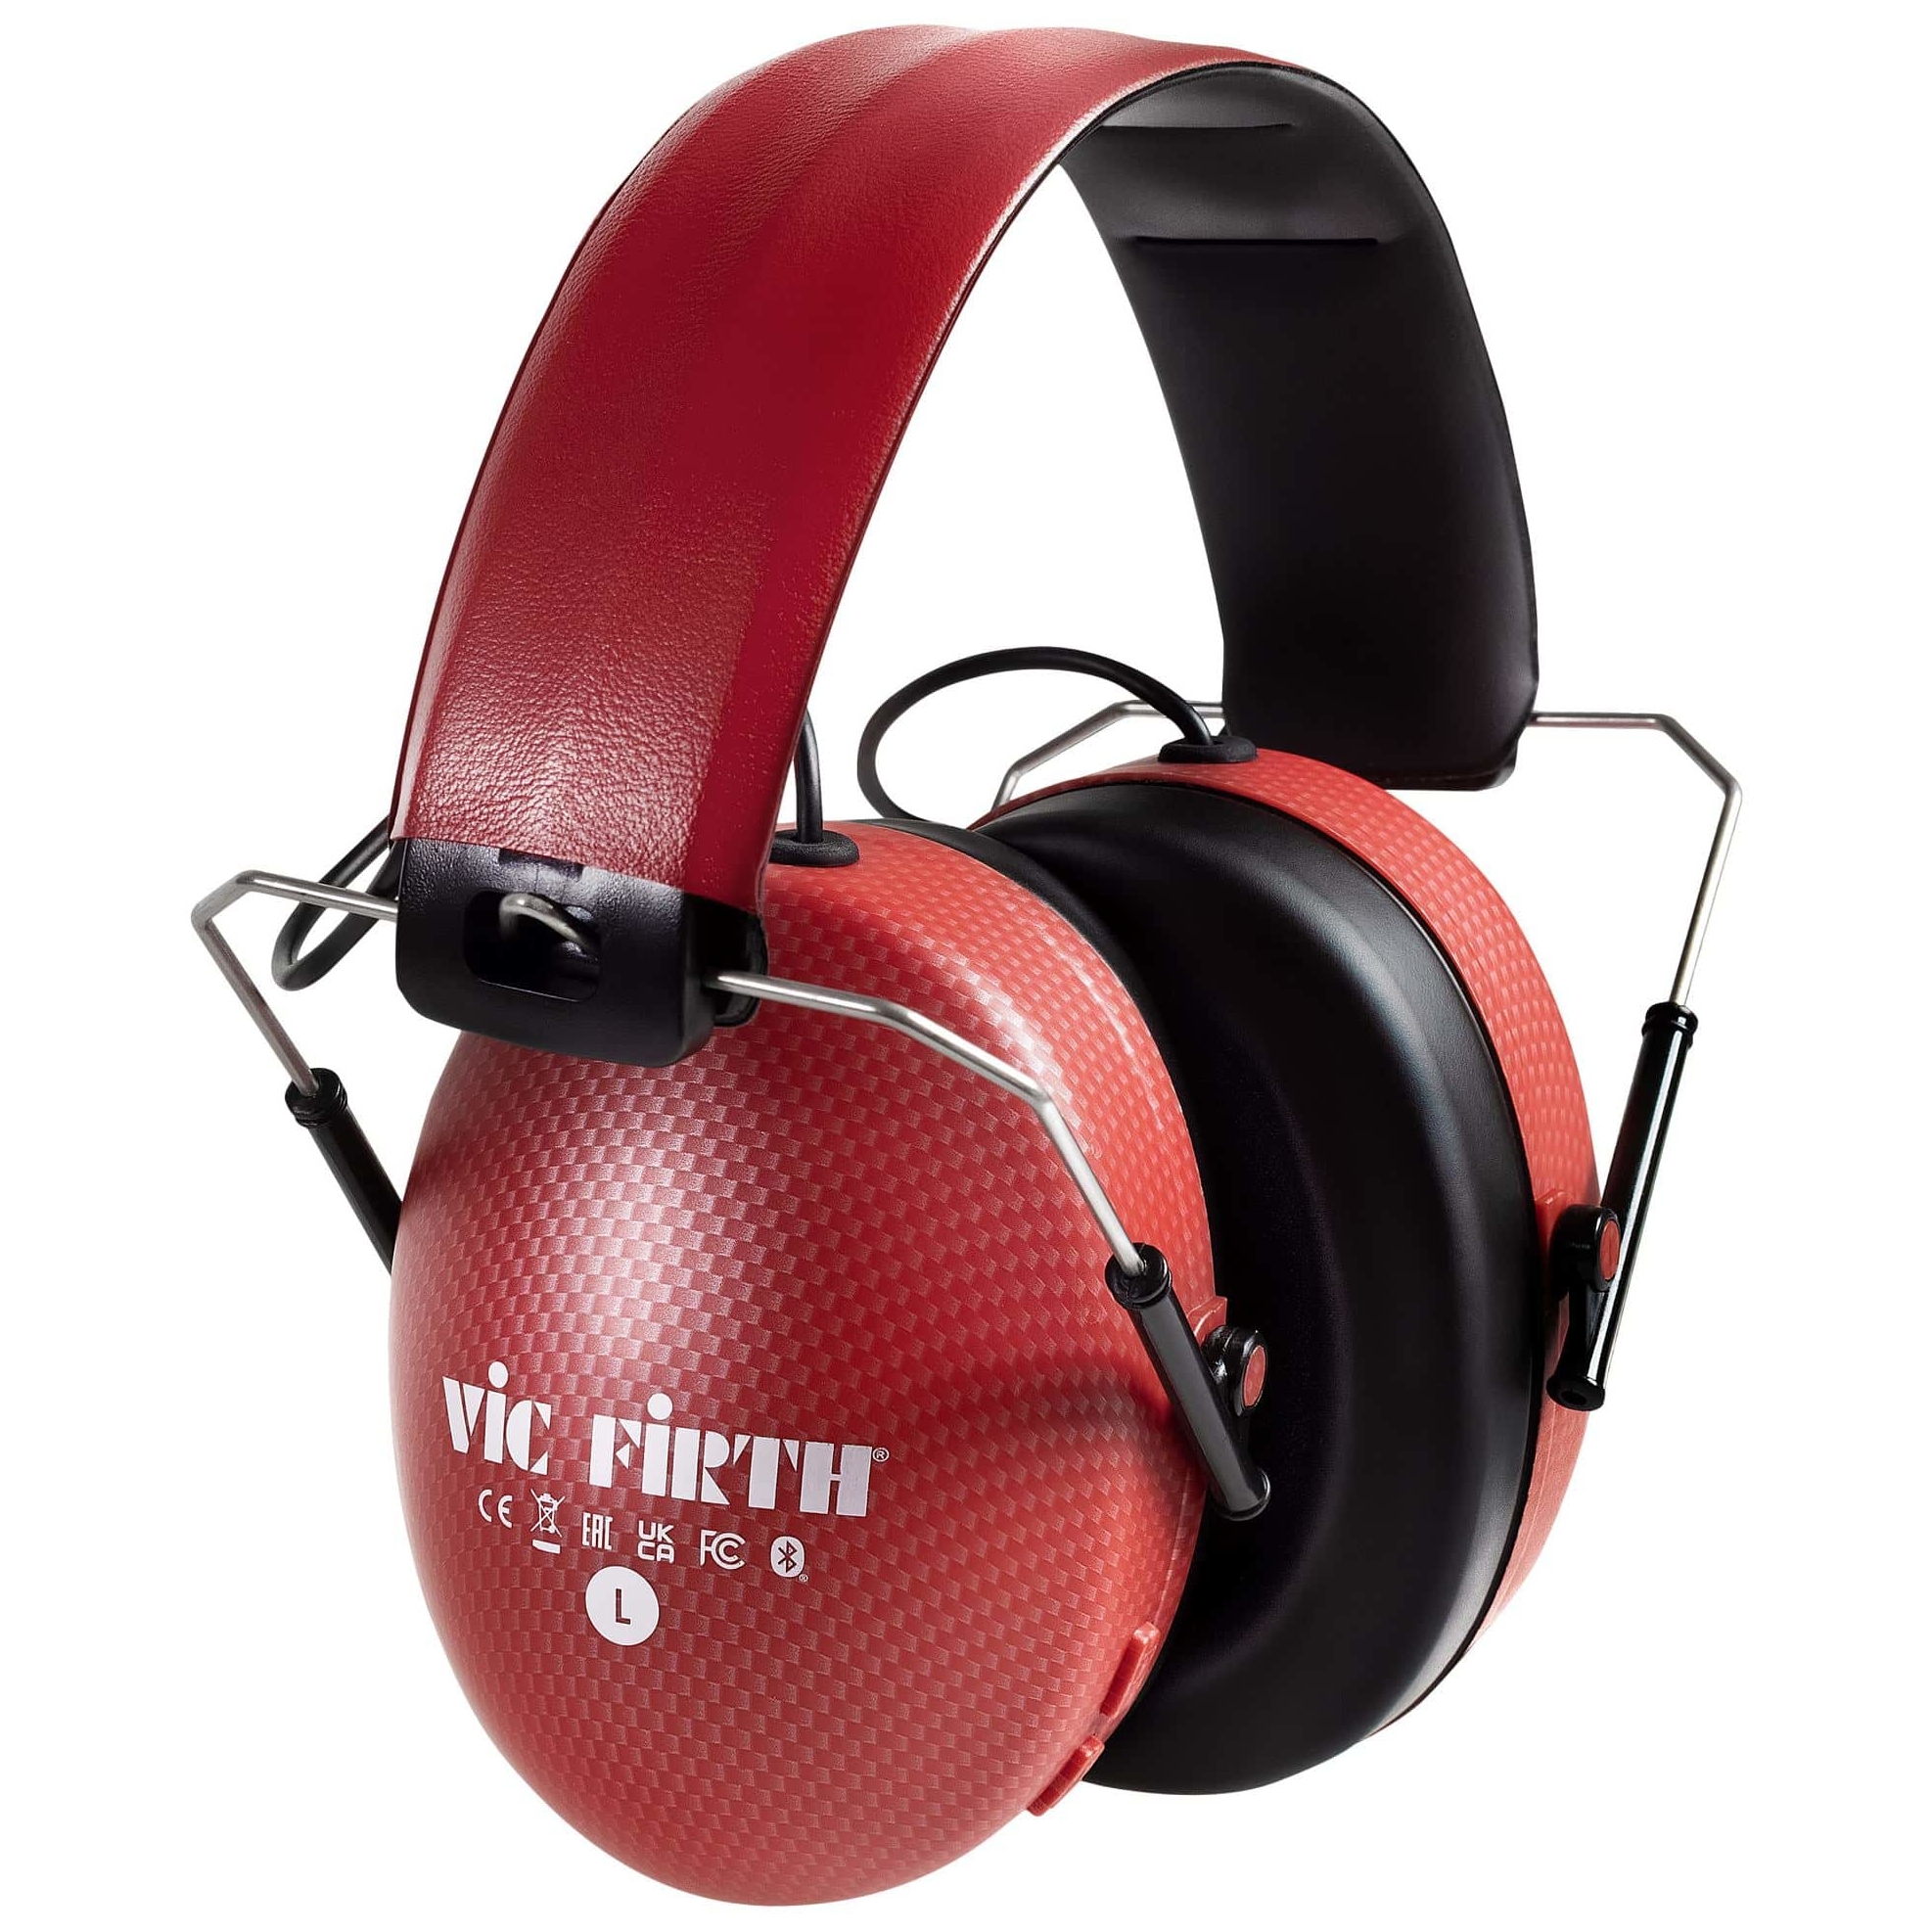 Vic Firth VXHP0012 Bluetooth Isolation Headphpones